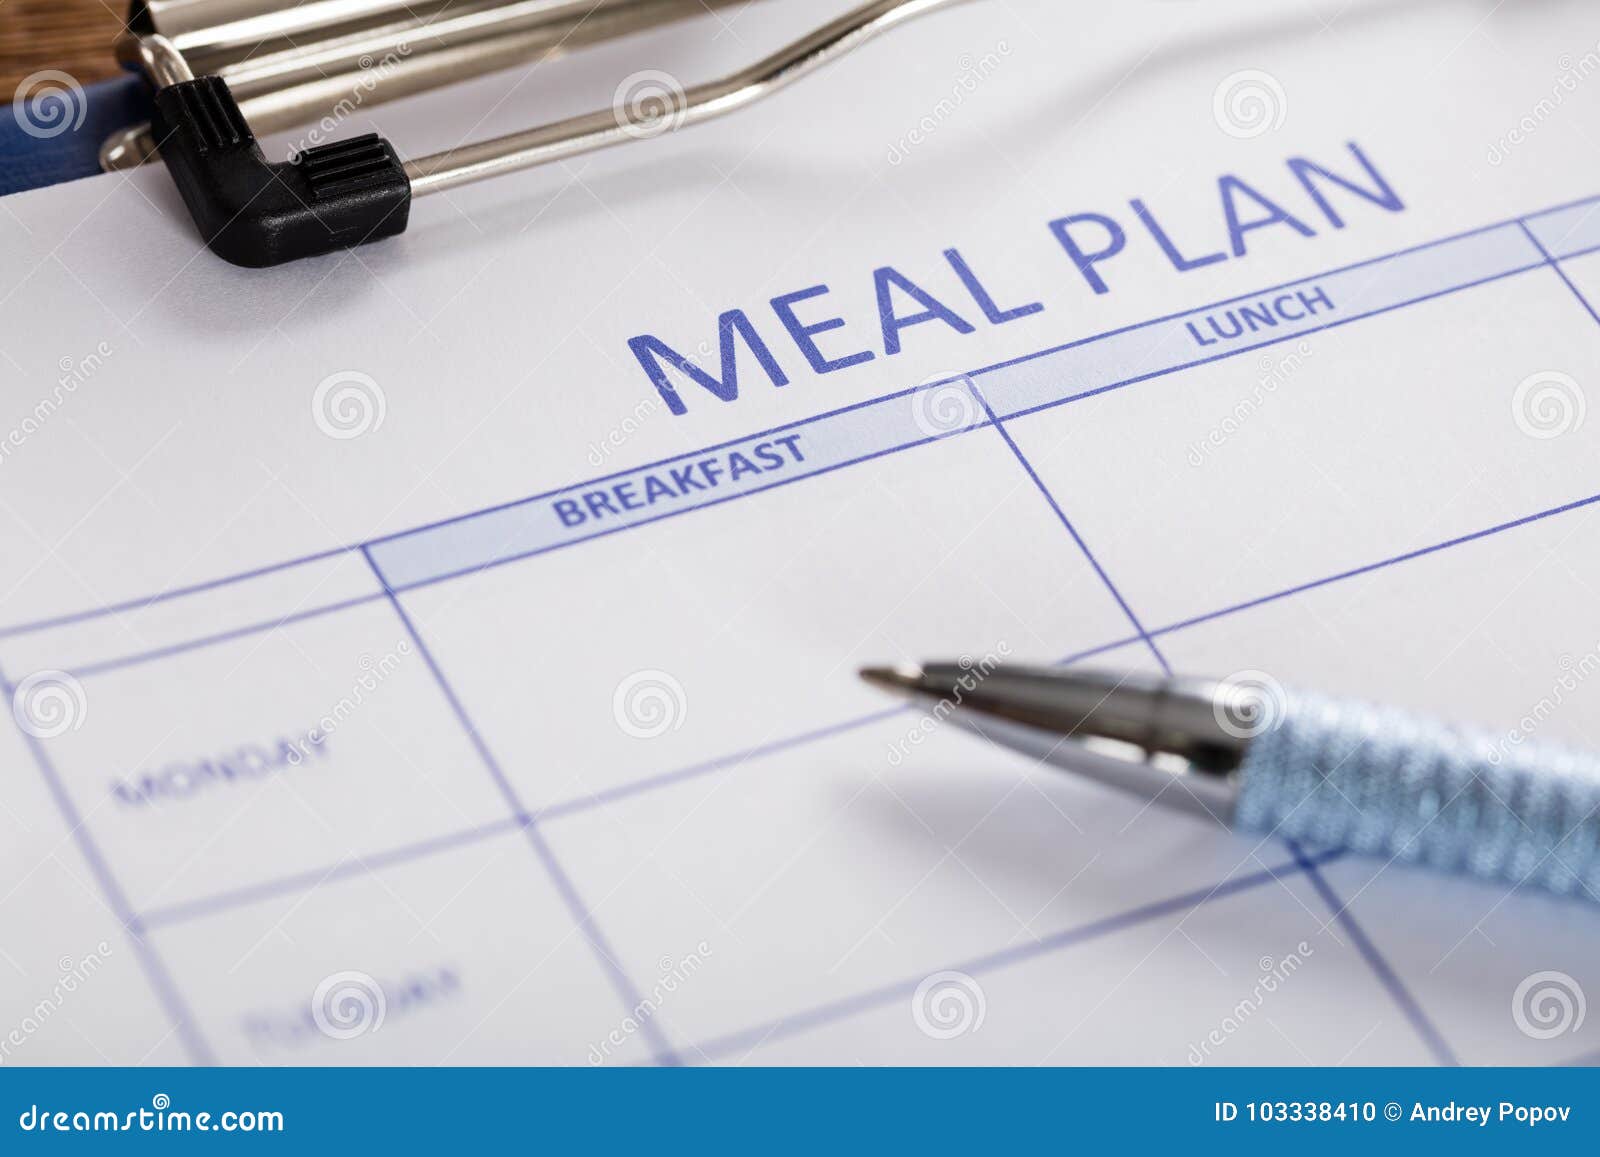 pen with meal plan form